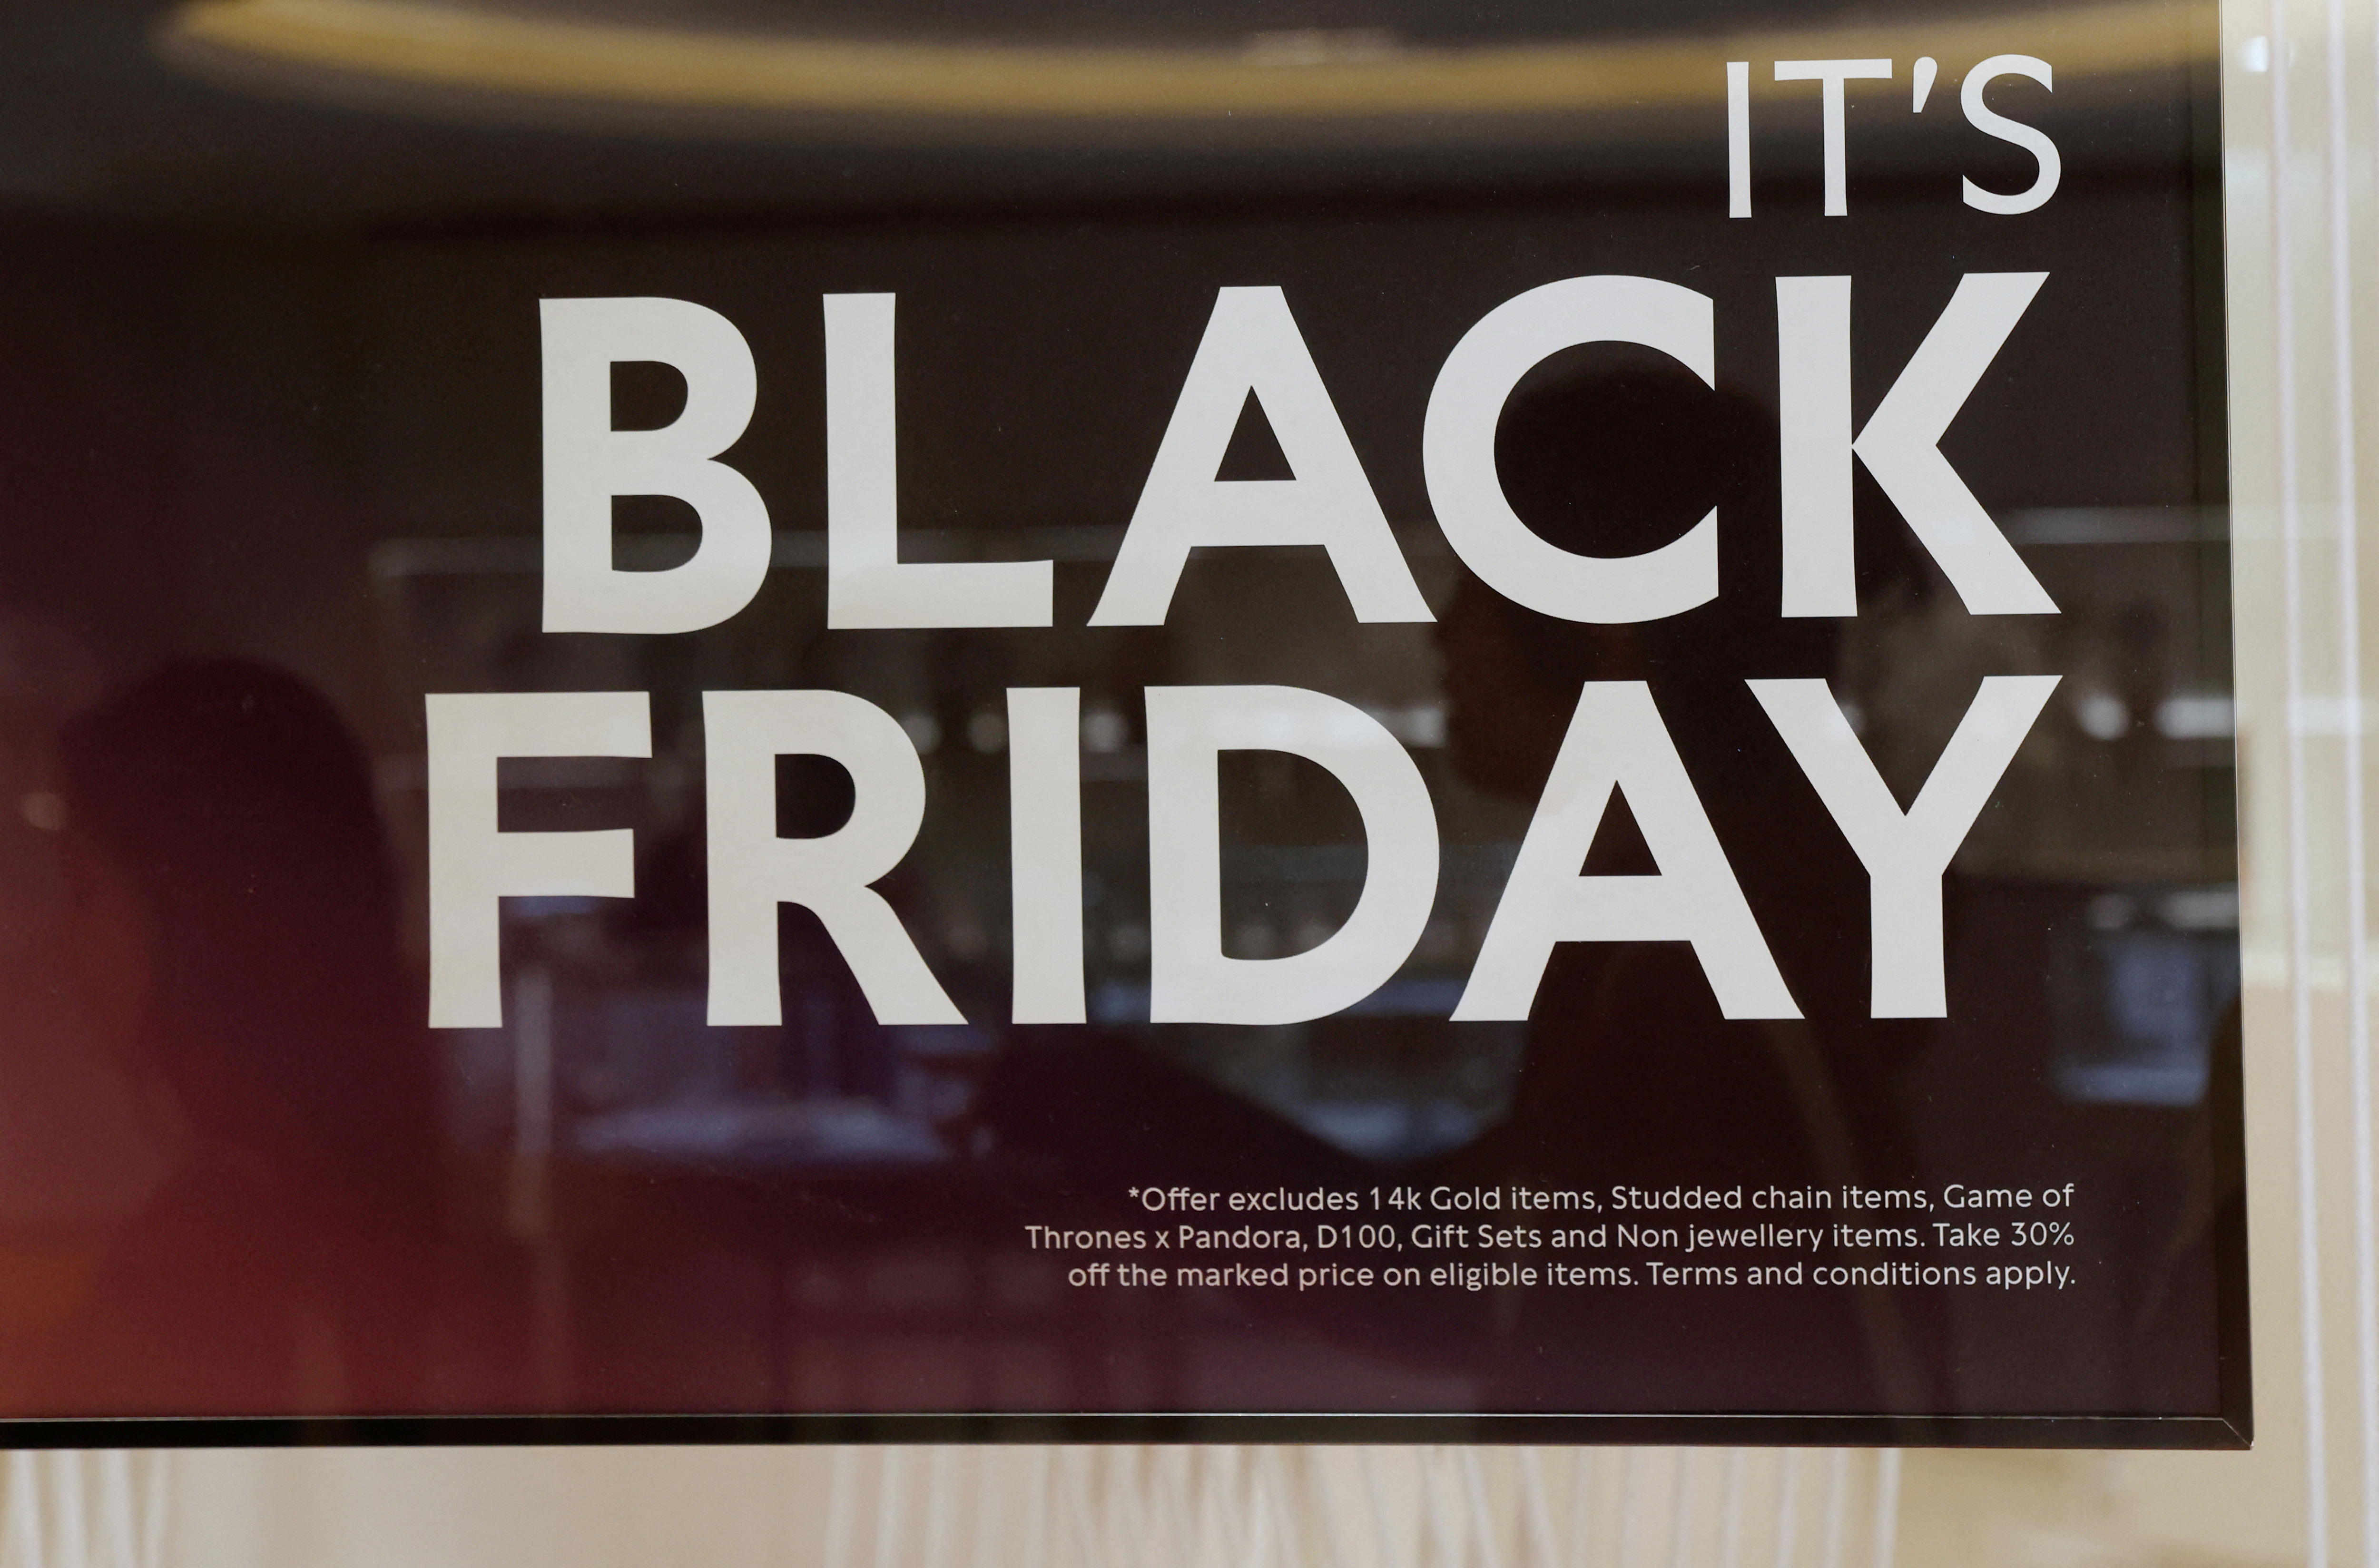 Kohl's - Kohl's Kicks Off Holiday with First Look at Black Friday Deals